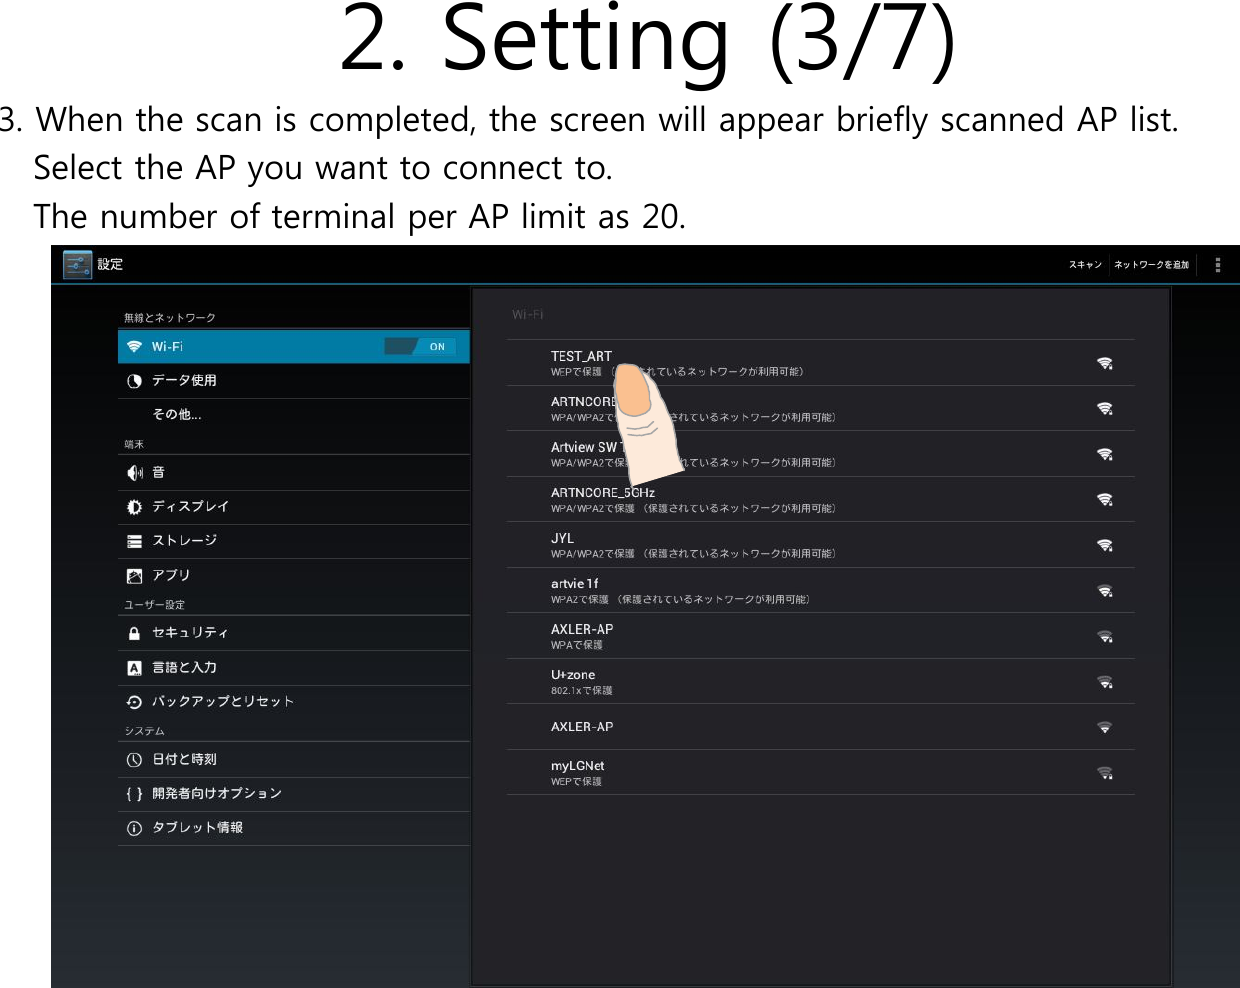 2. Setting (3/7)3. When the scan is completed, the screen will appear briefly scanned AP list.Select the AP you want to connect to.The number of terminal per AP limit as 20.